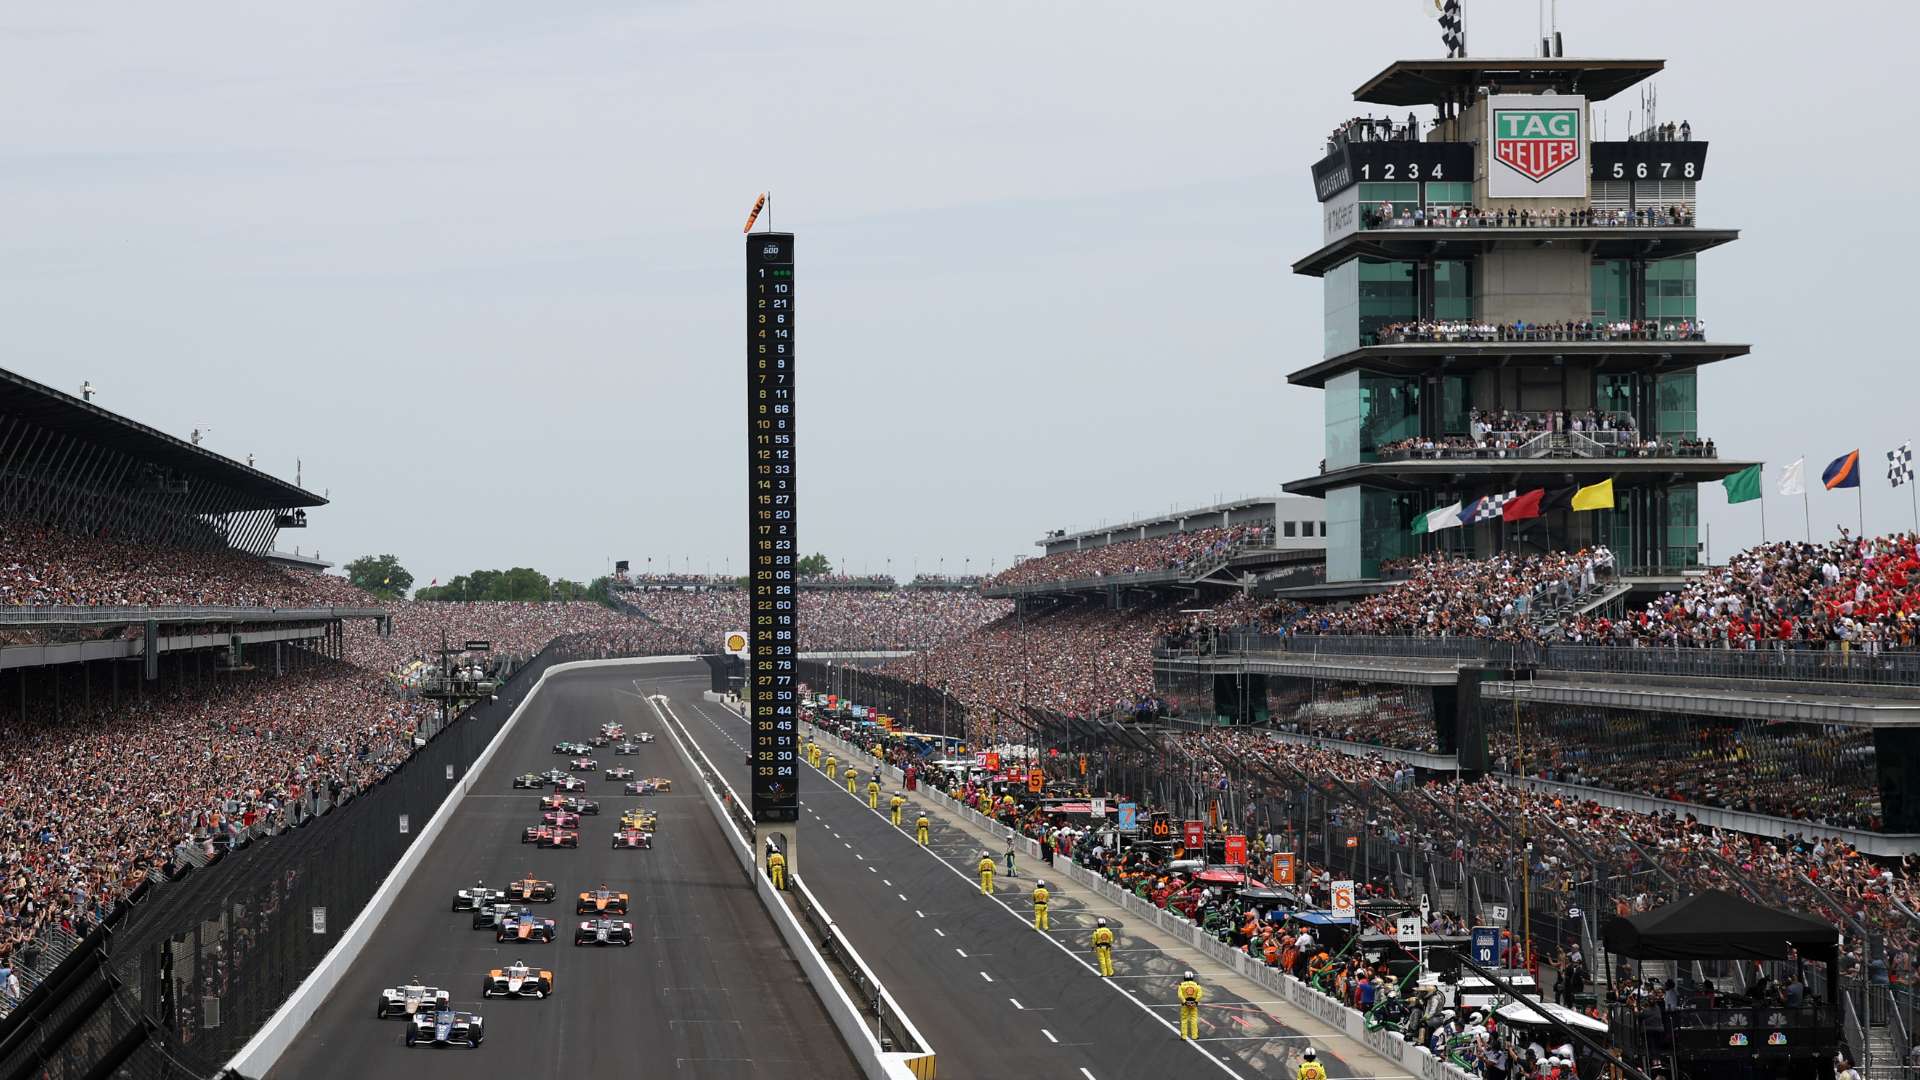 The 107th Running of Indianapolis 500 NASCAR